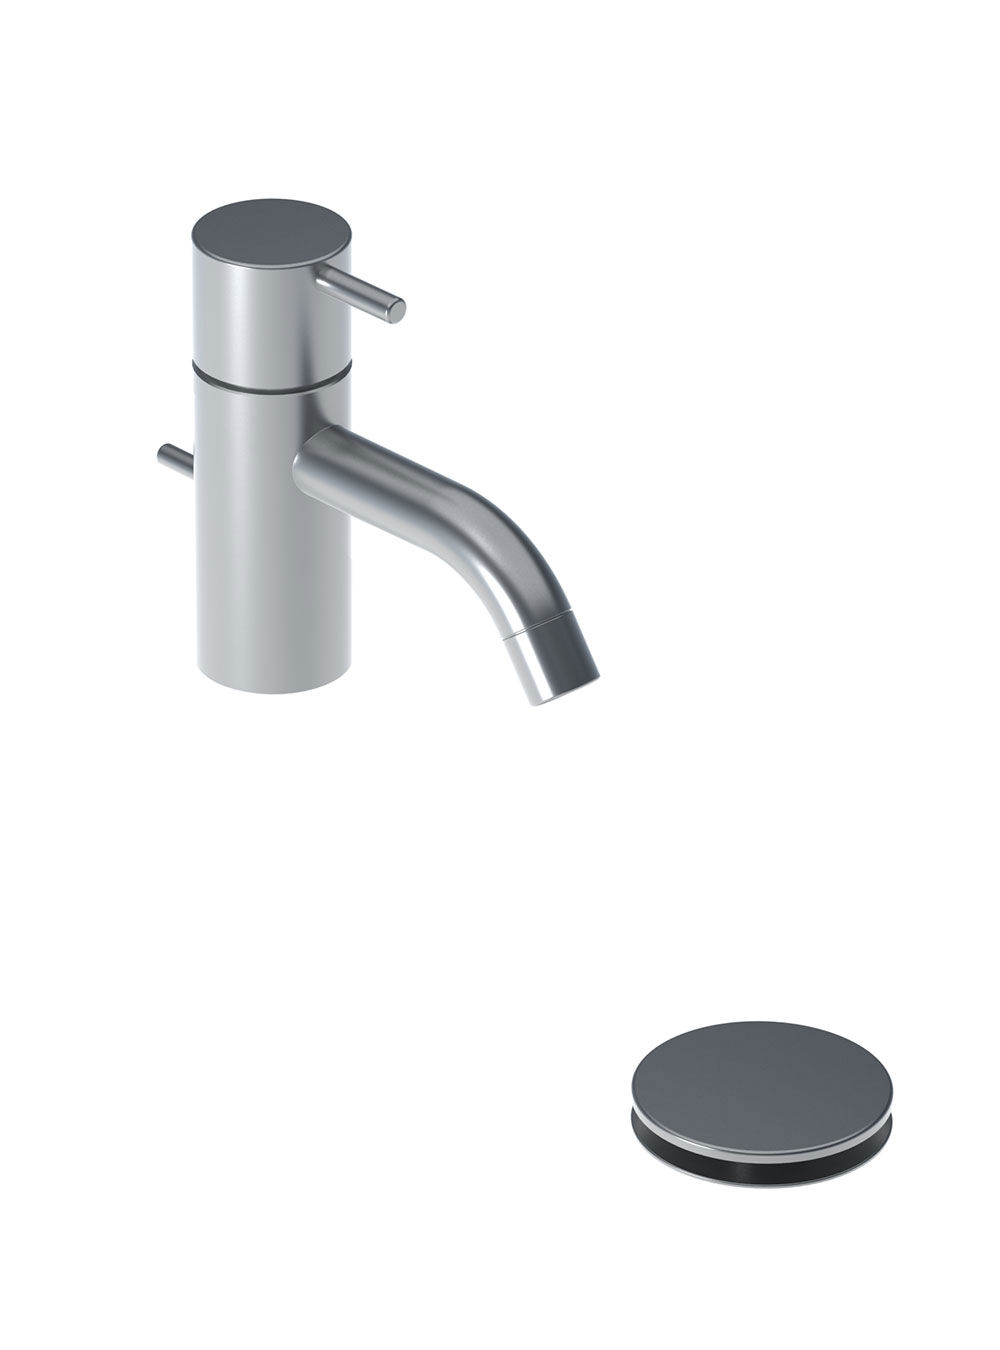 RB3: Pillar tap with ¼ turn ceramic disc technology, fixed spout with water saving aerator, pop-up waste 